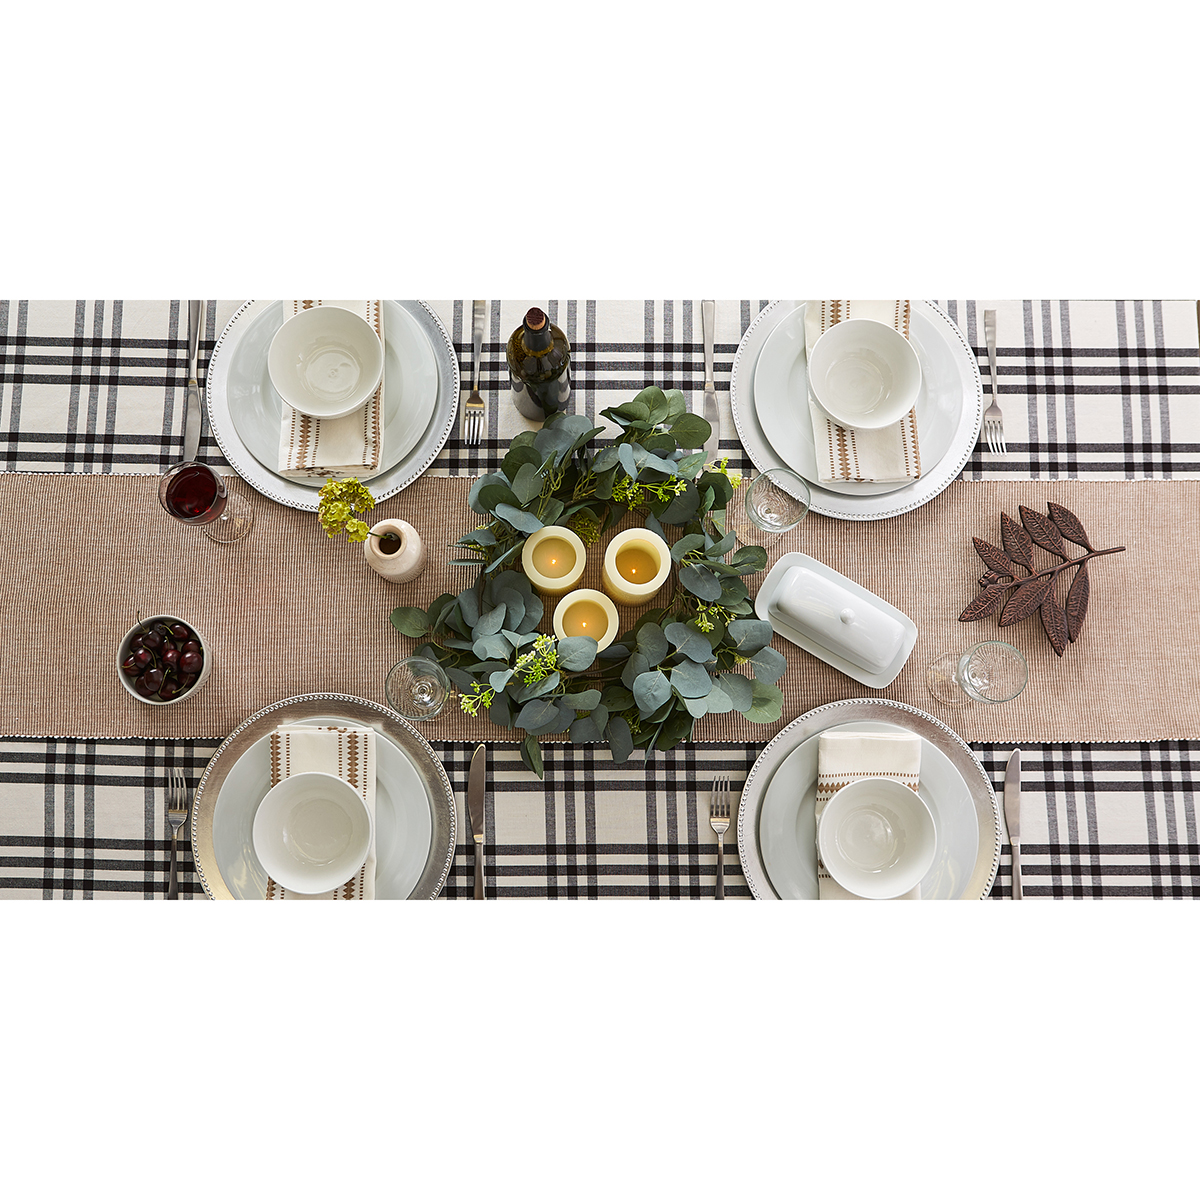 DII(R) Design Imports 2-Tone Ribbed Table Runner